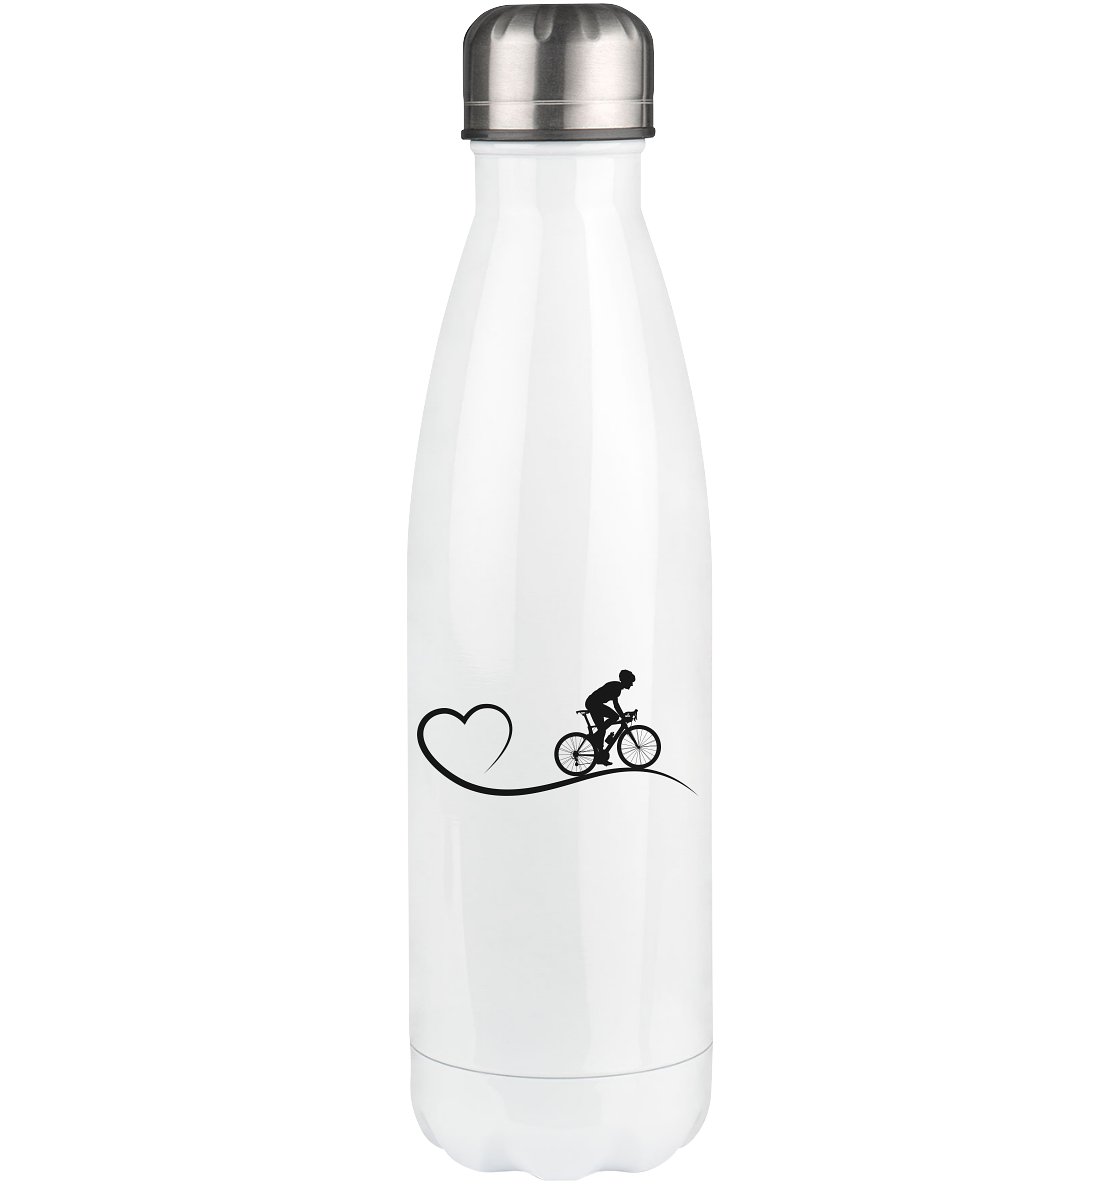 Heart 1 and Cycling - Edelstahl Thermosflasche fahrrad 500ml